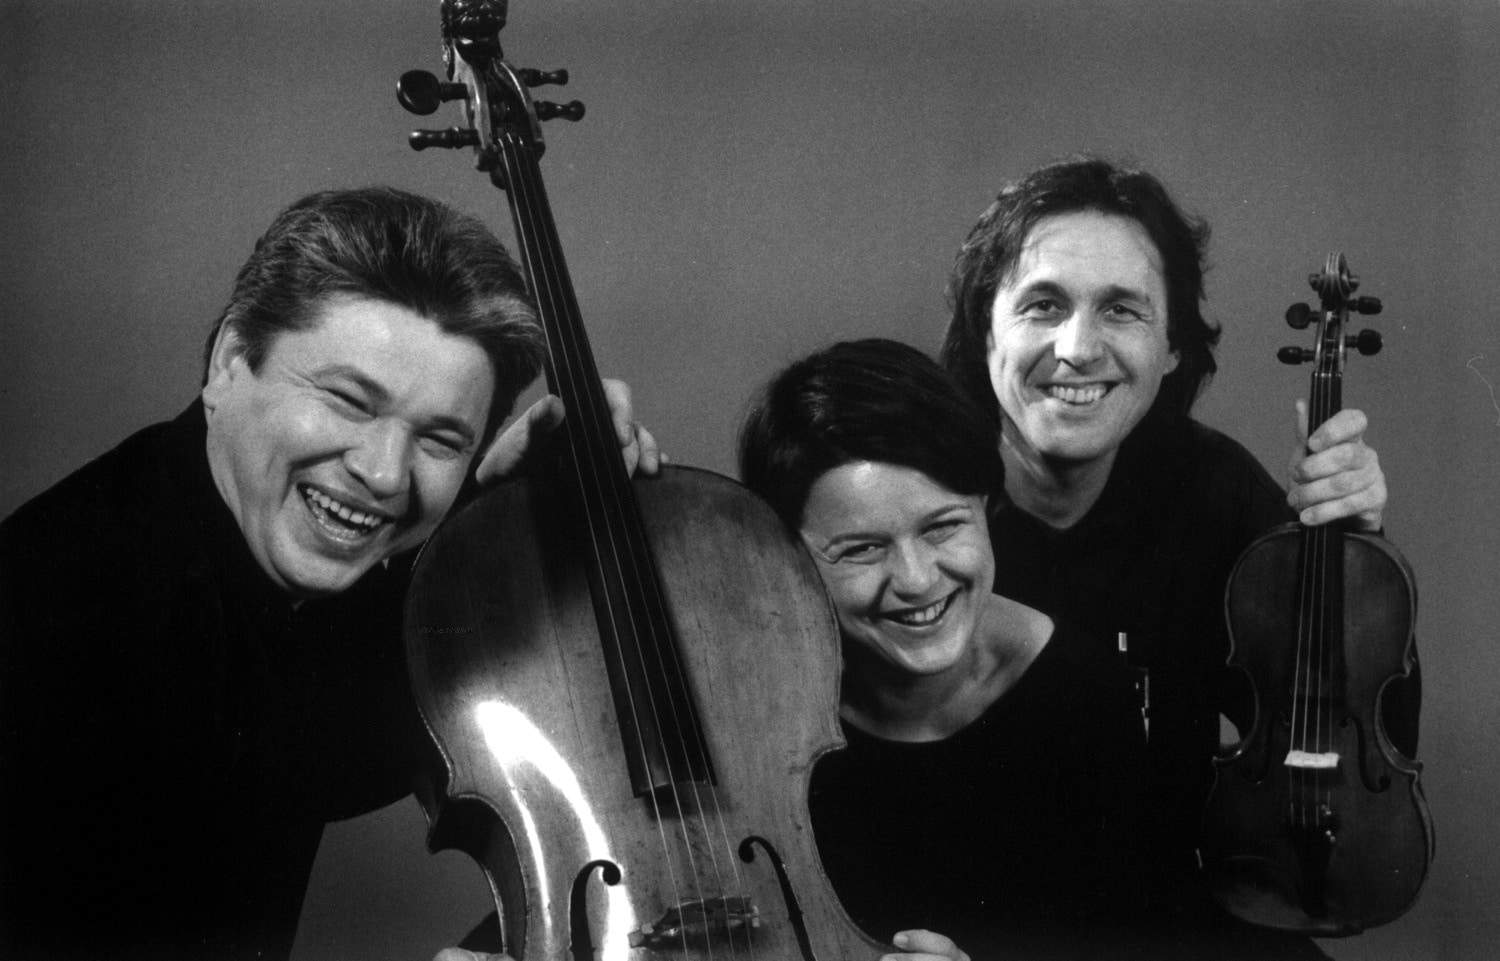 Superb Beethoven-Top-notch performance of Amael Piano Trio in London